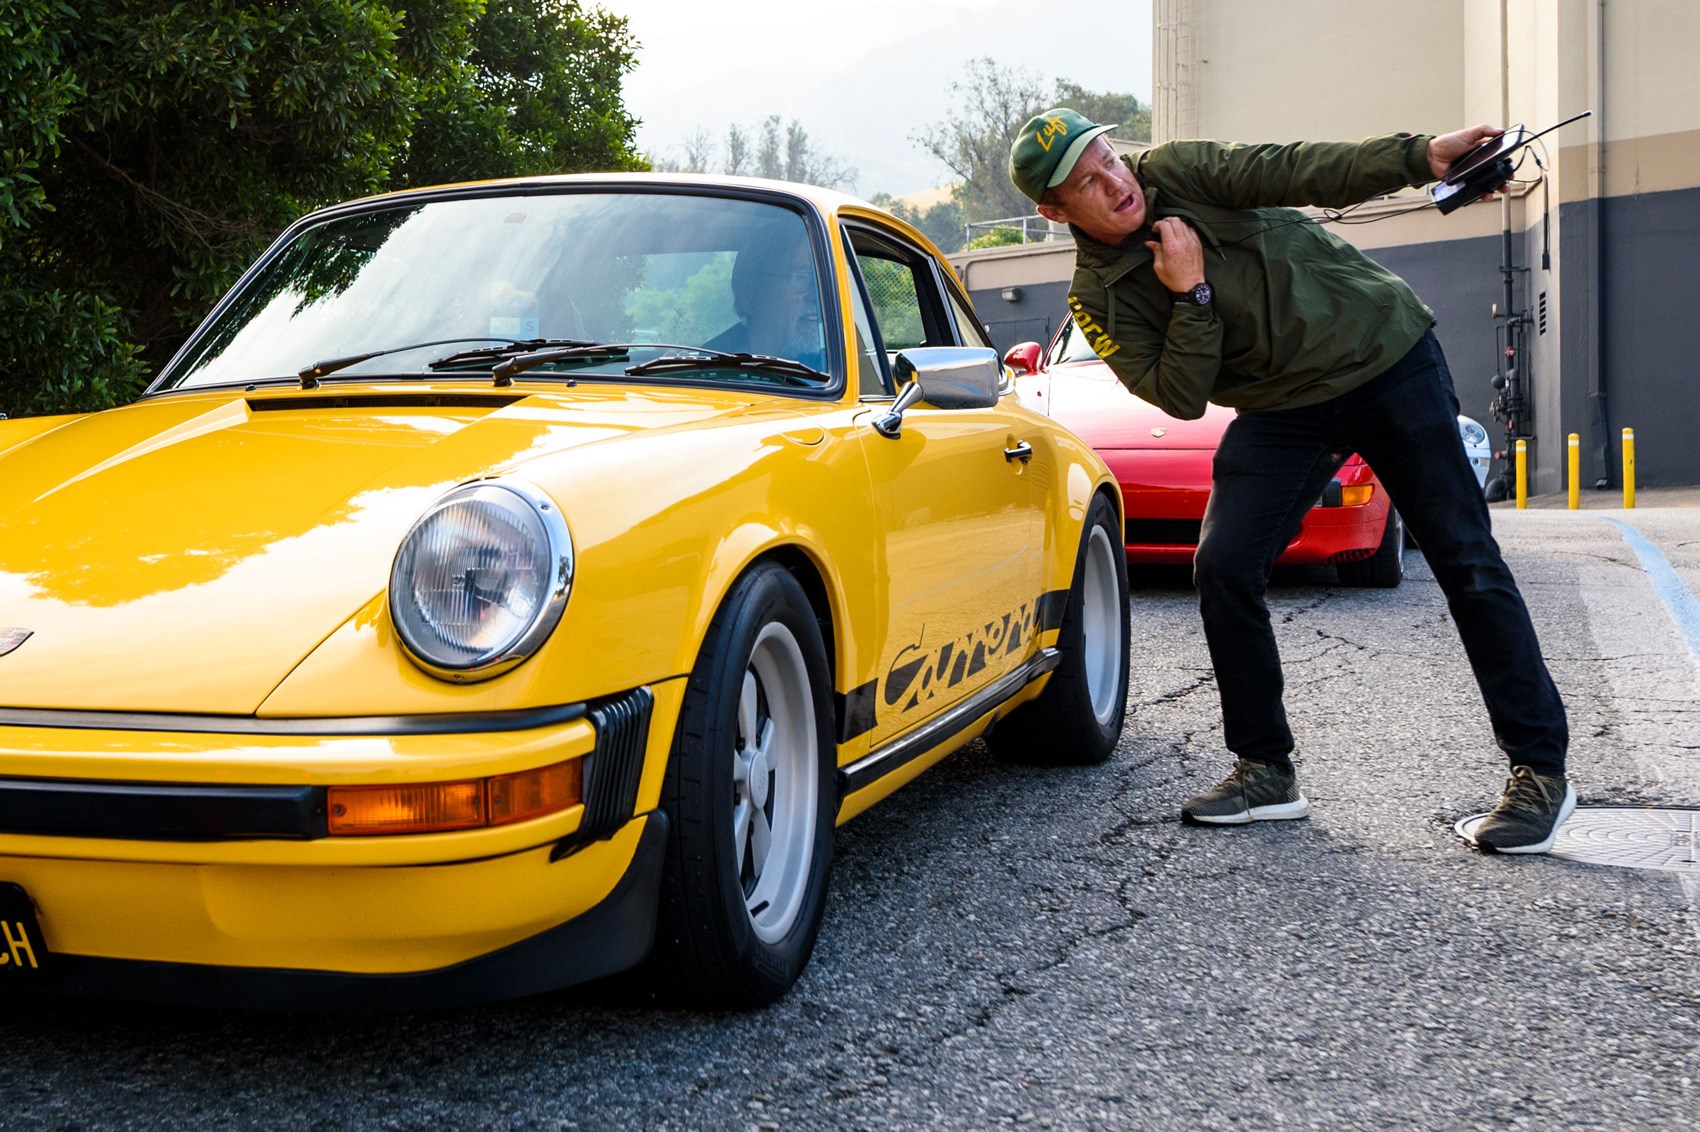 Porsche 911 driving tips from pro driver Patrick Long, Articles